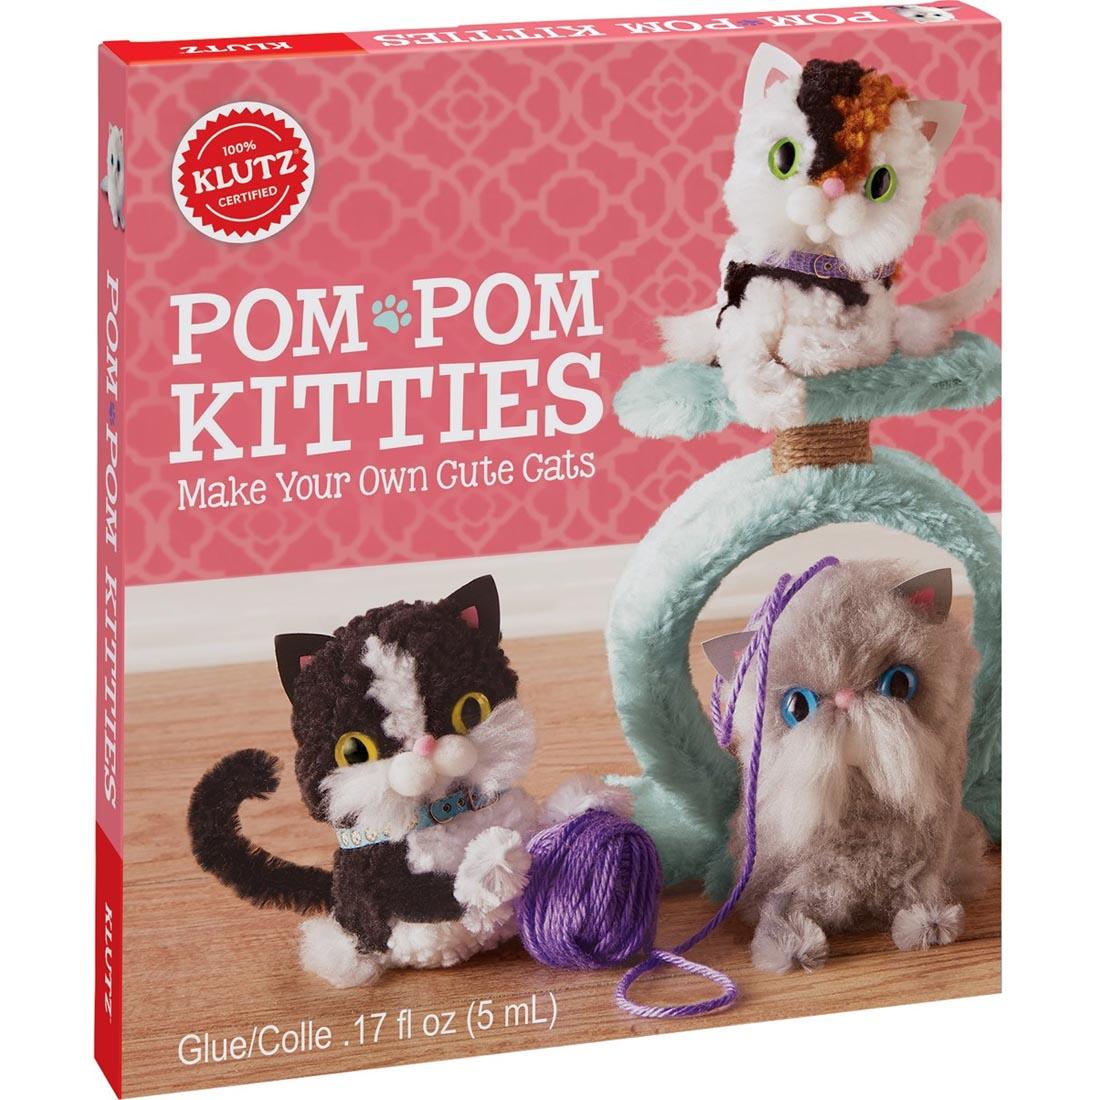 package shows three different completed projects of pom-pom cats